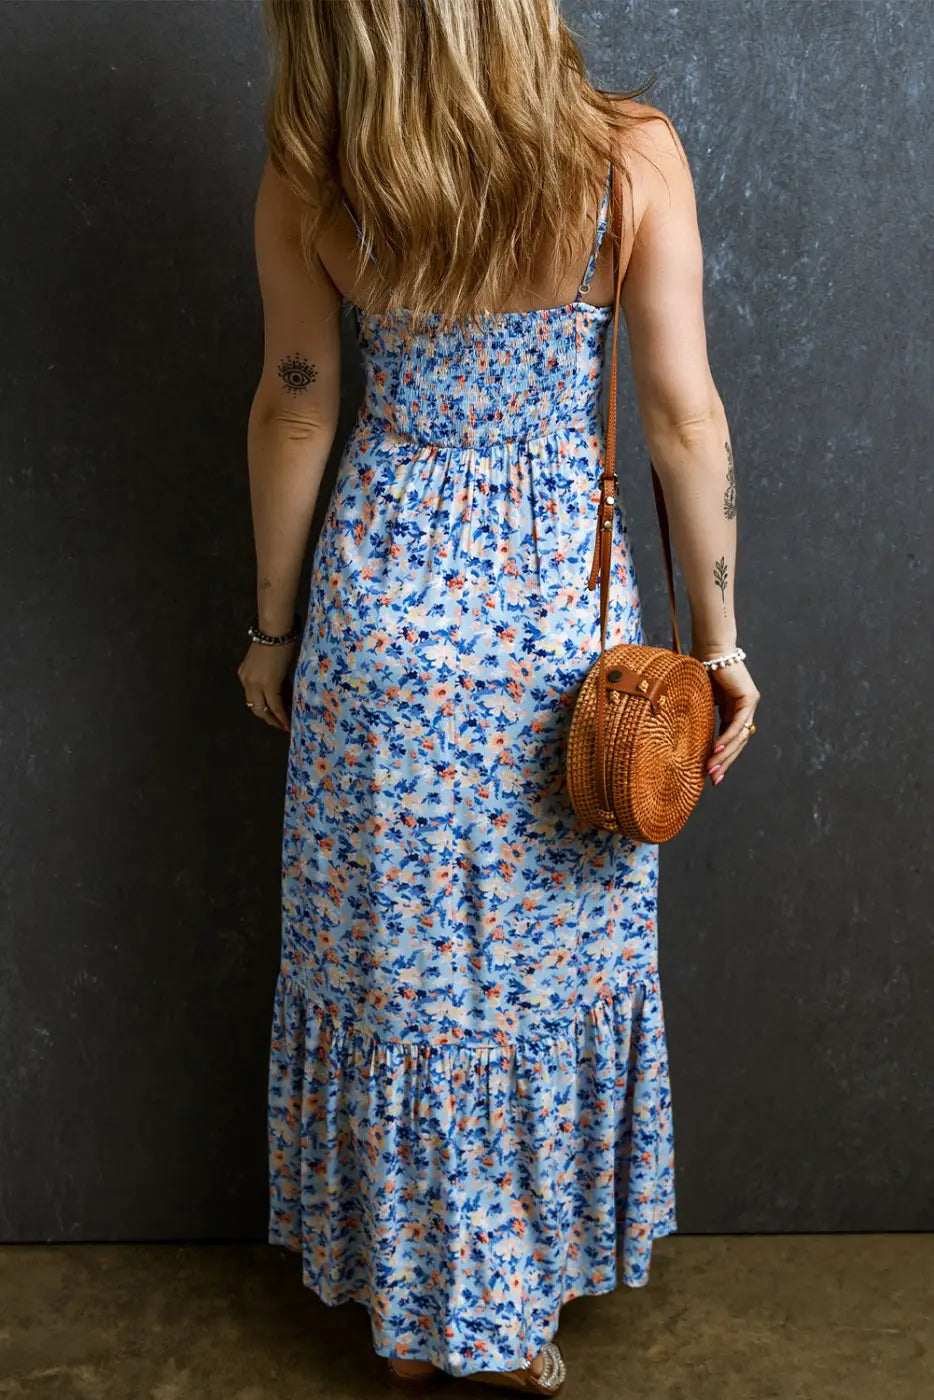 Sky blue floral maxi dress - ruffled ruched - dresses